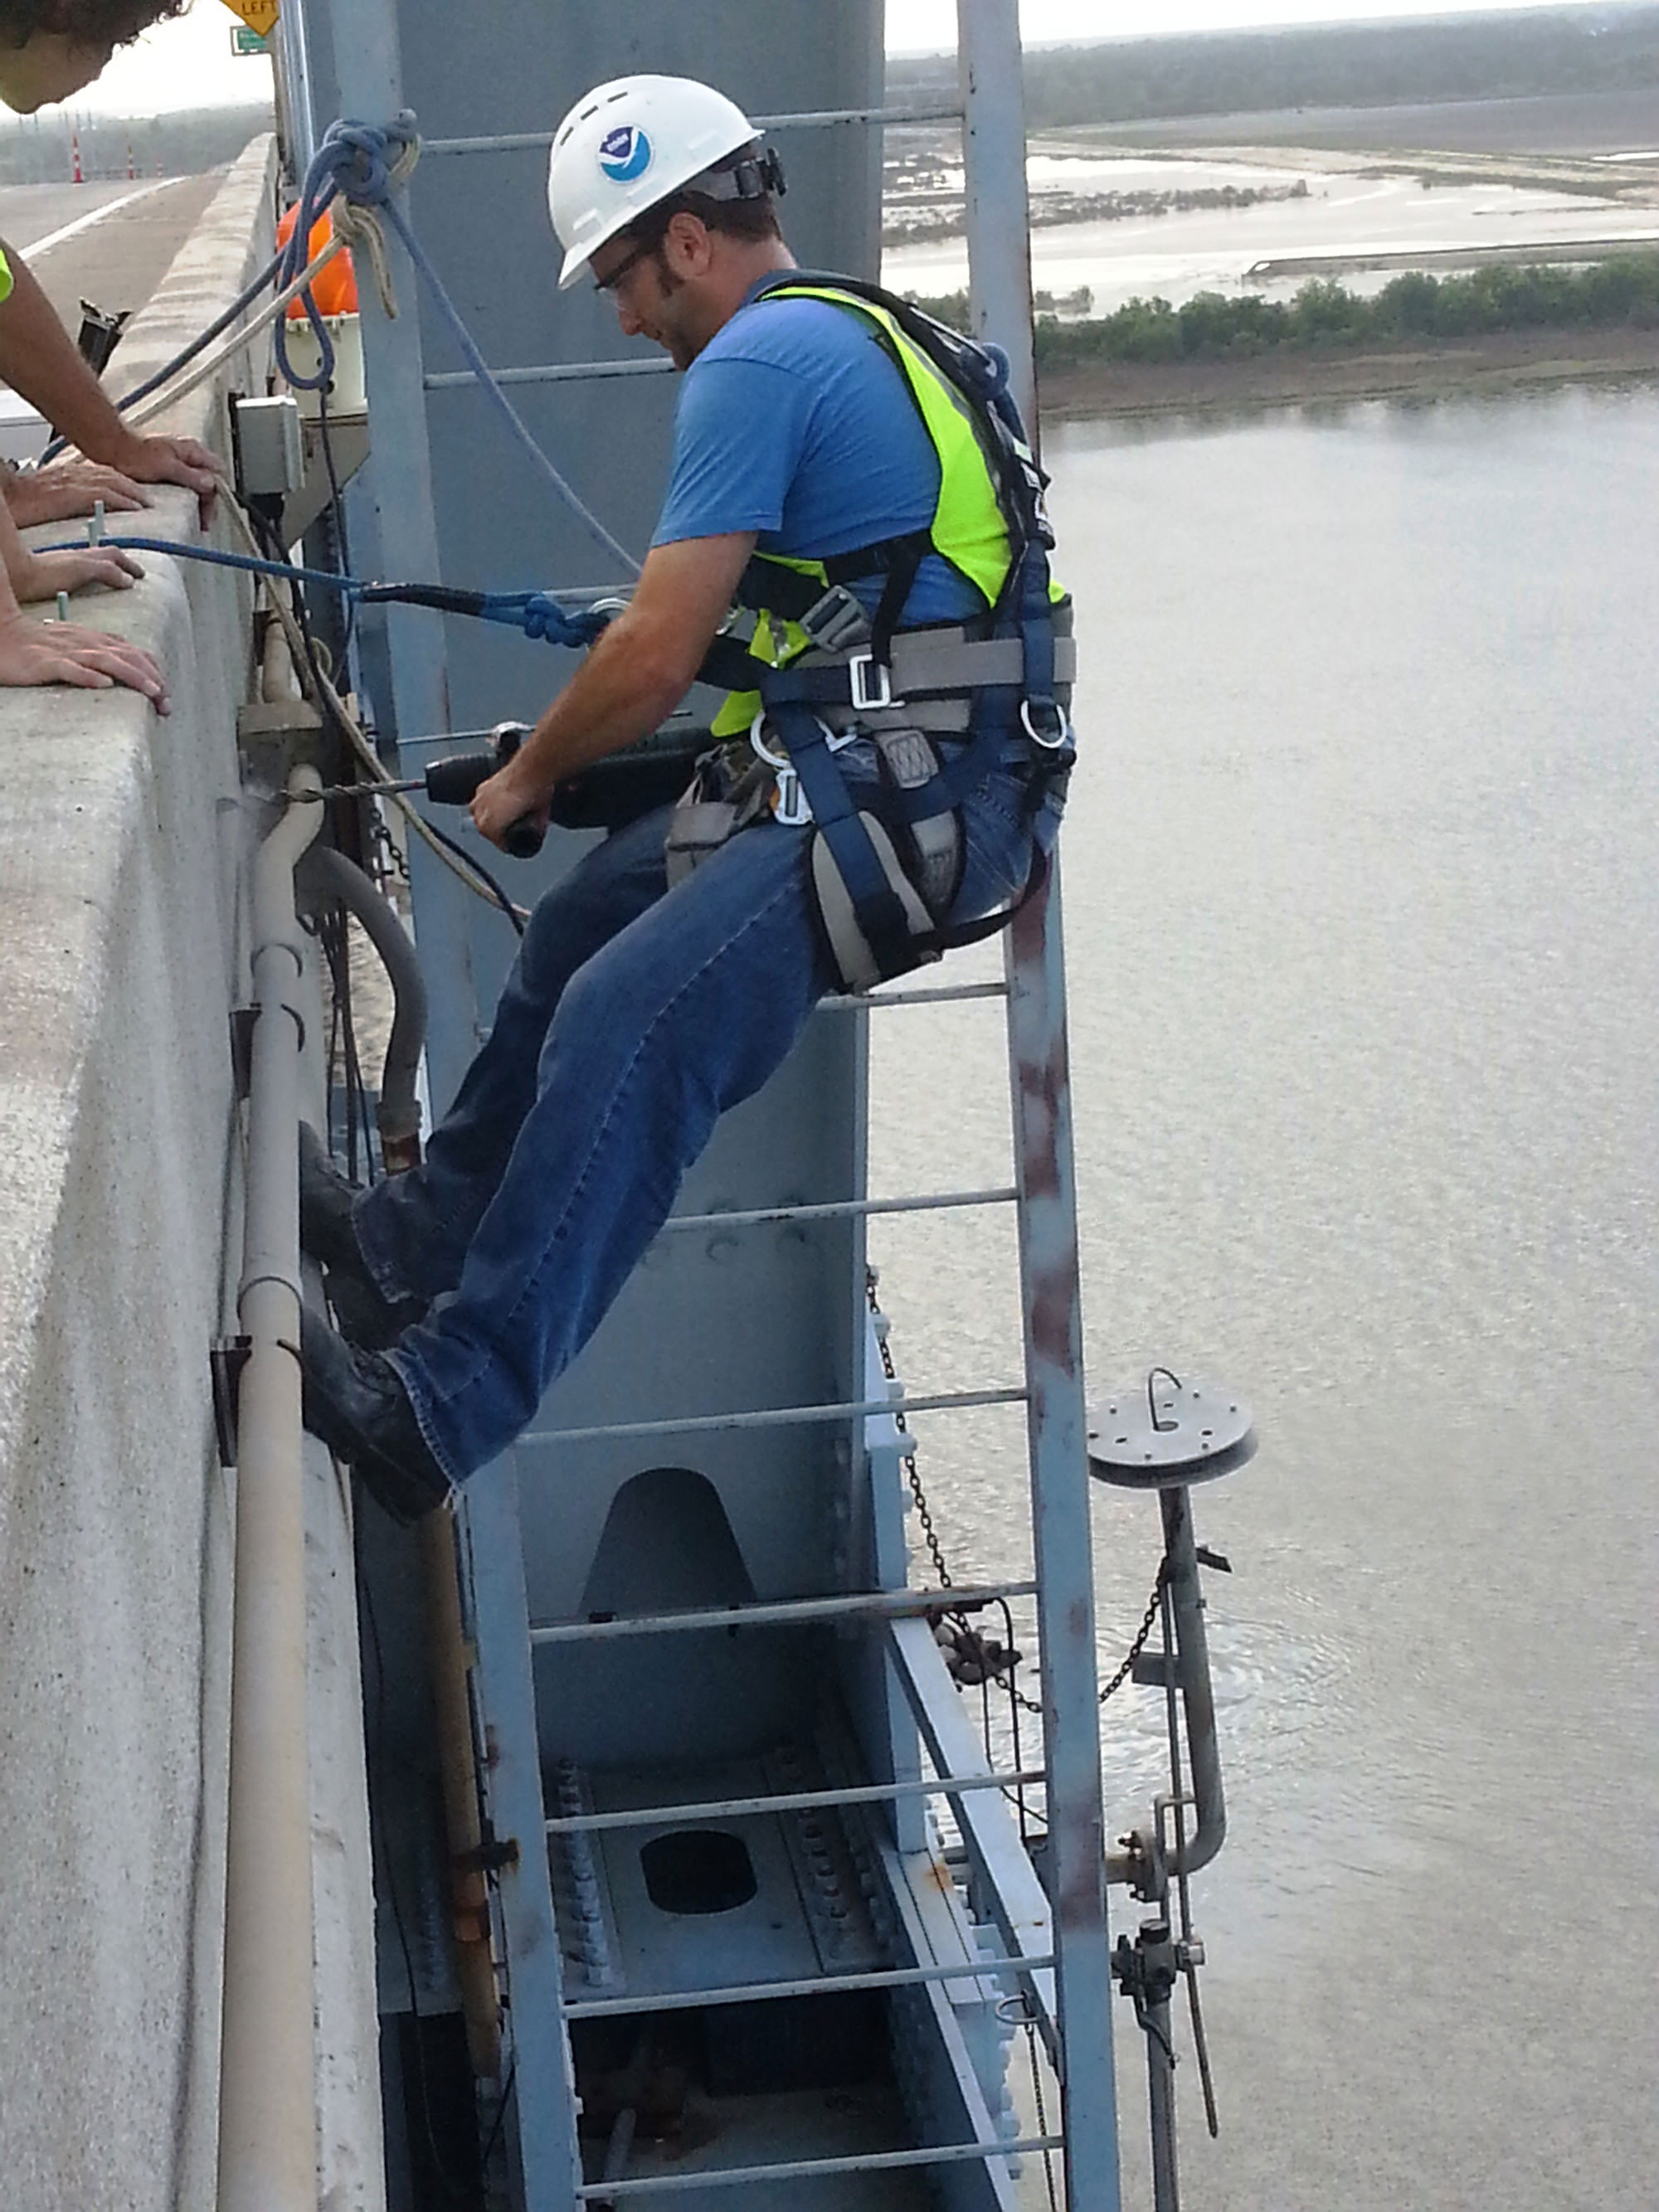 safety harness inspection